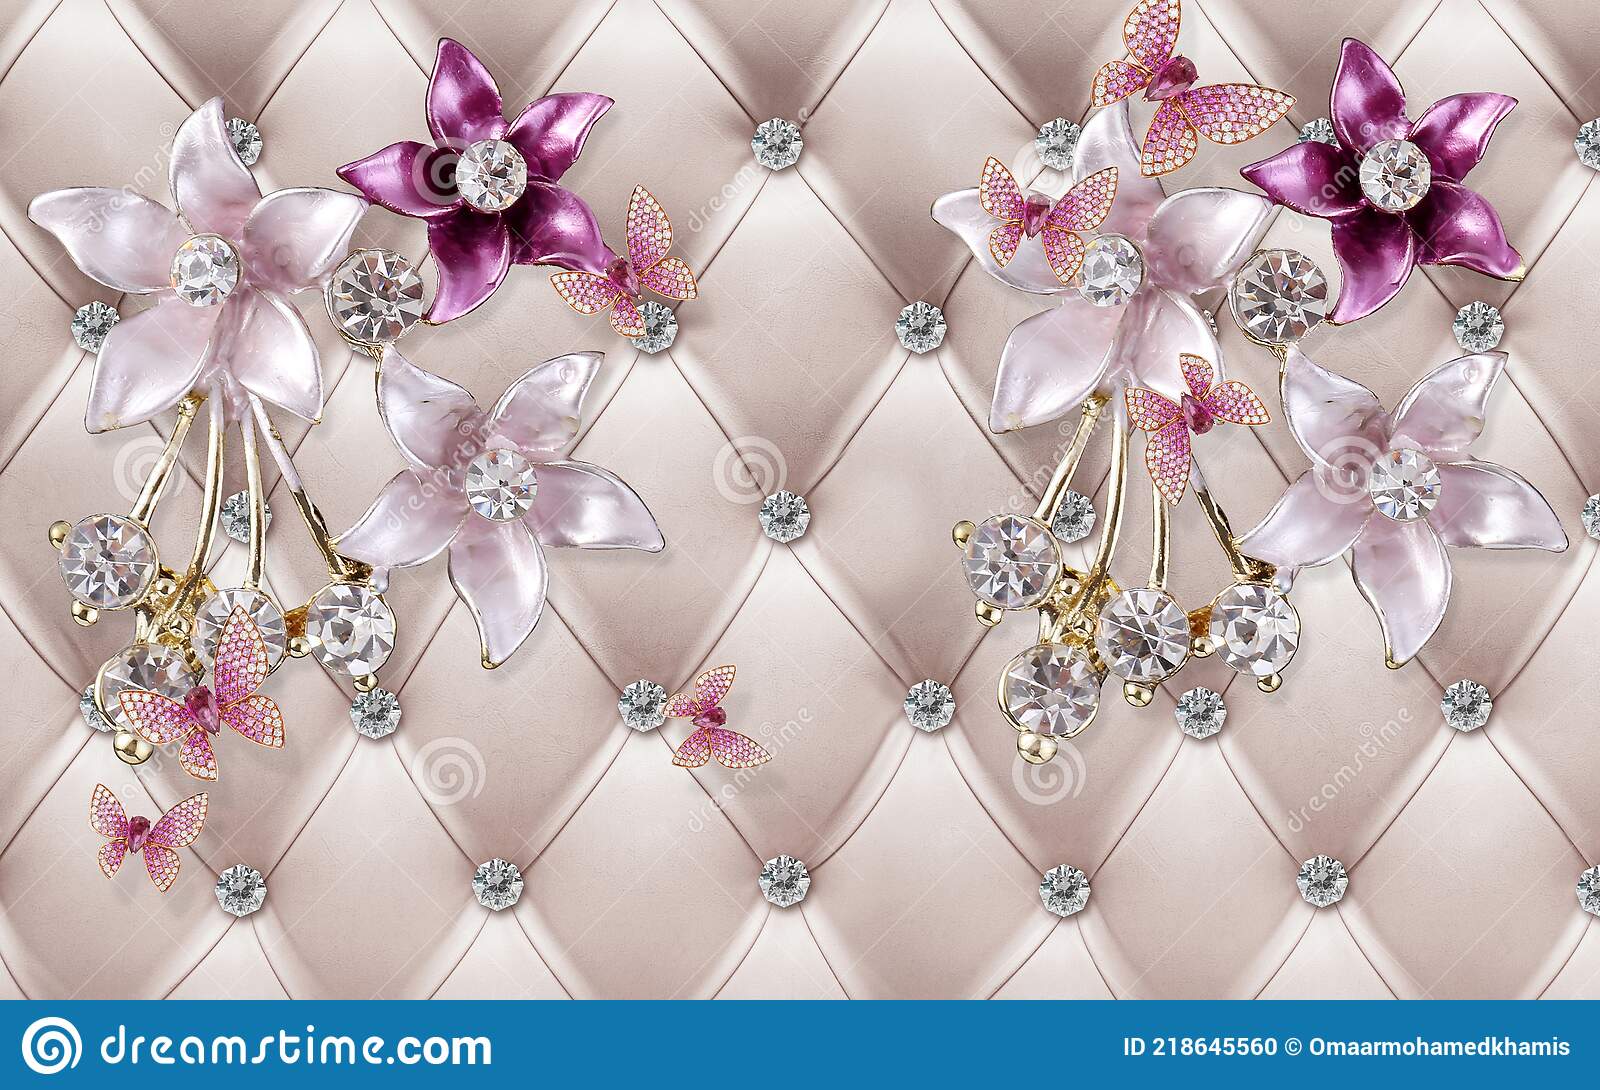 D wallpaper pink and maroon jewelry flowers and silver branches on leather background stock illustration